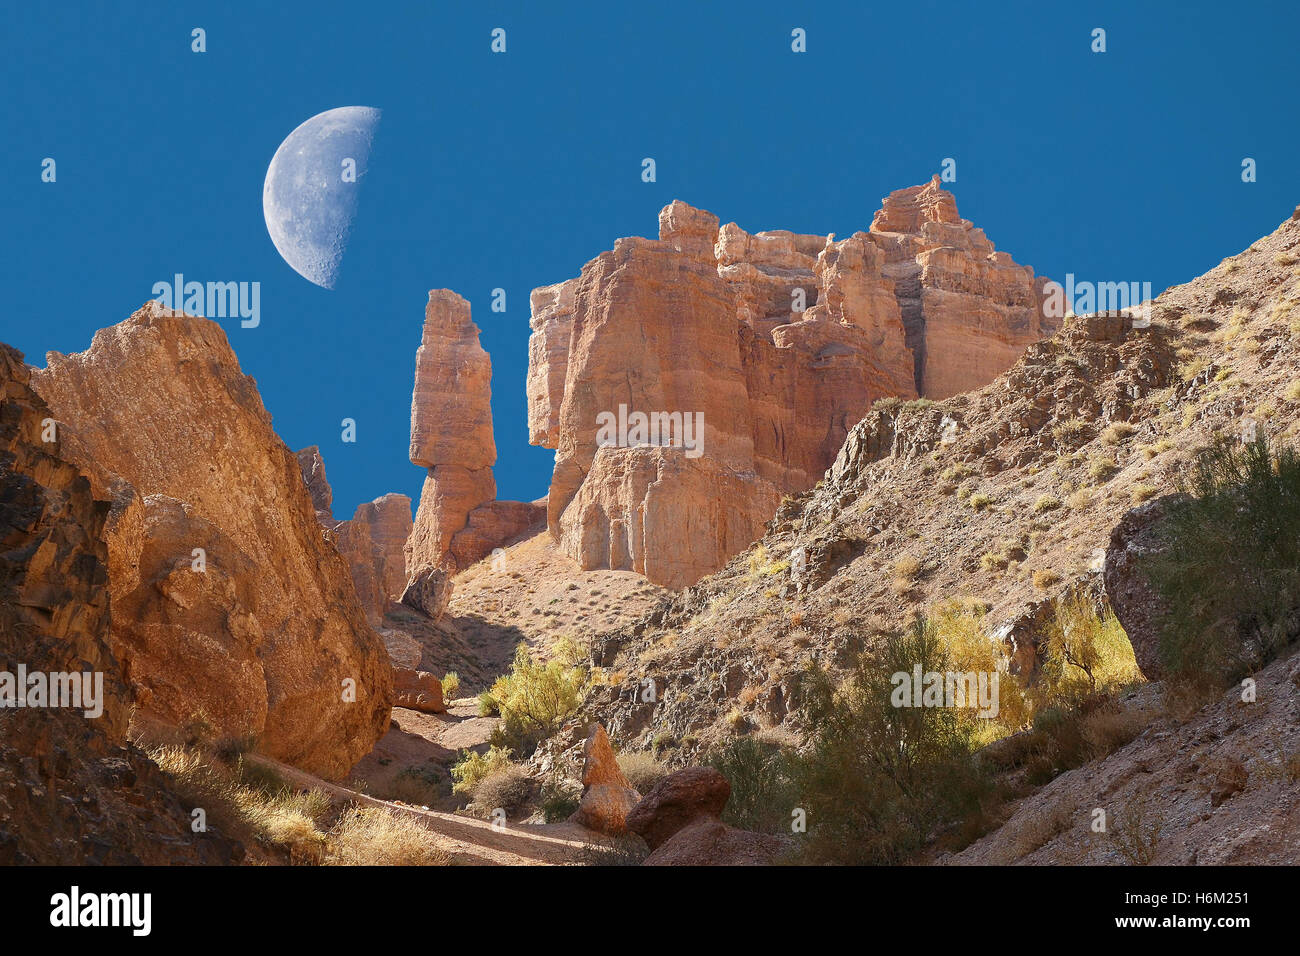 Majestic cliffs on a background of blue sky with a moon. Charyn canyon, Kazakhstan. Stock Photo